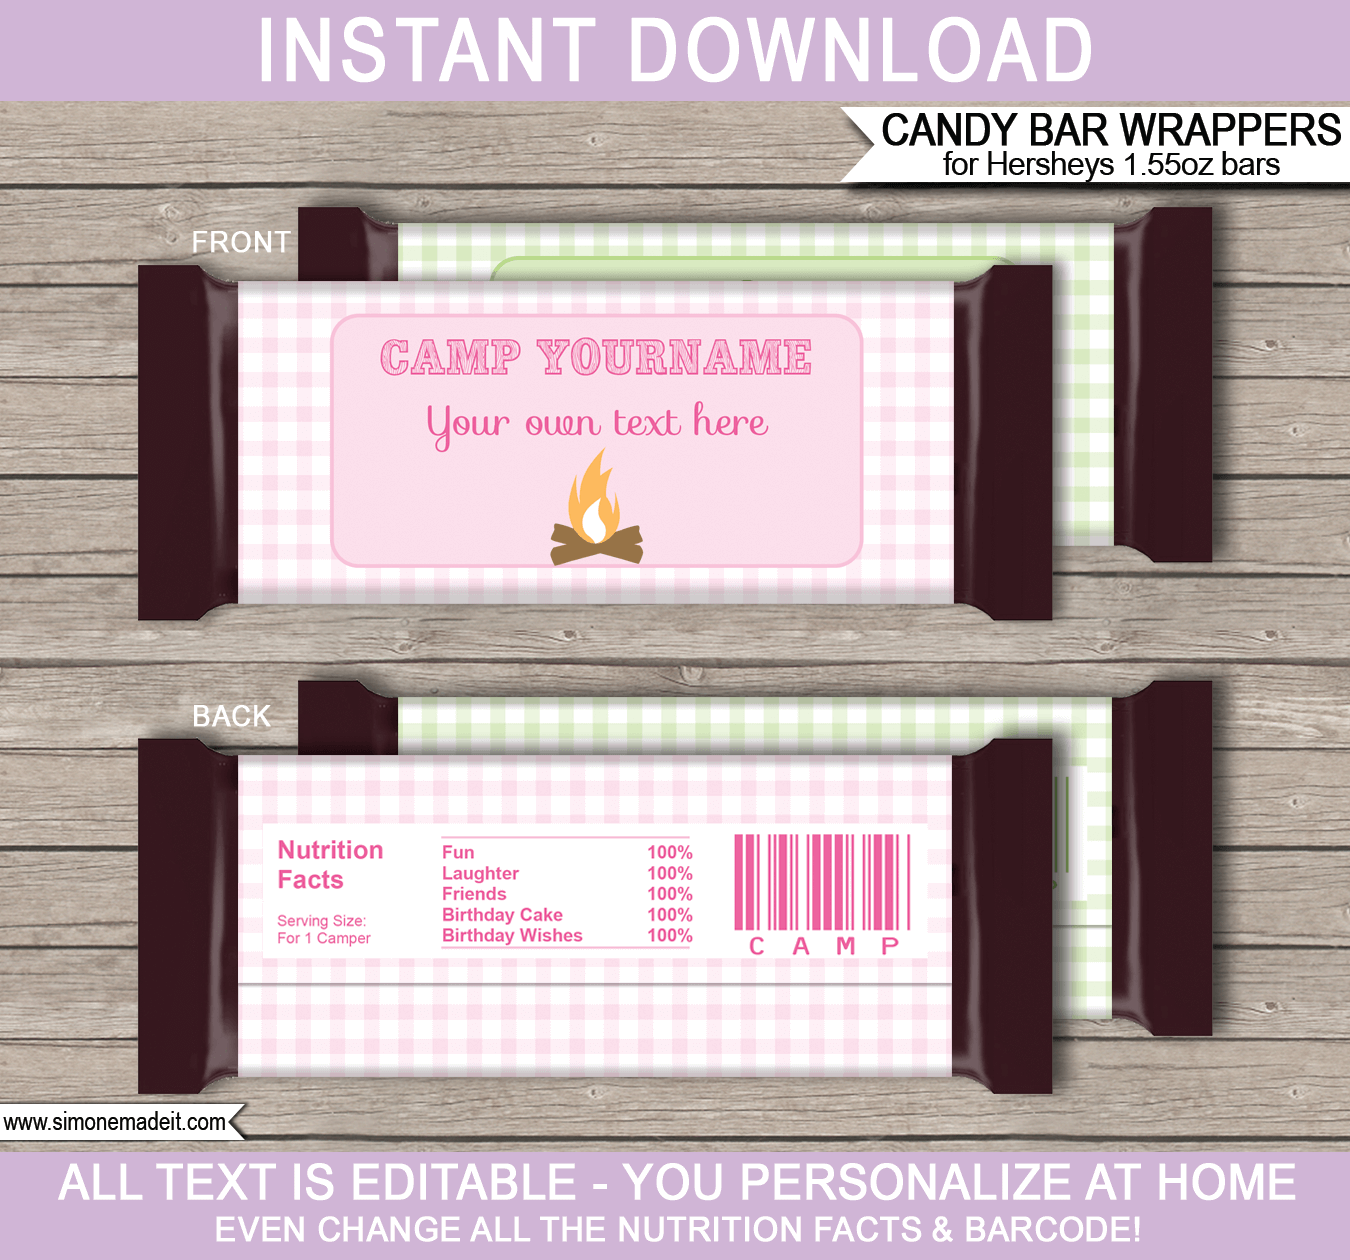 Glamping Hershey Candy Bar Wrappers | Birthday Party Favors | Personalized Candy Bars | Editable Template | INSTANT DOWNLOAD $3.00 via simonemadeit.com